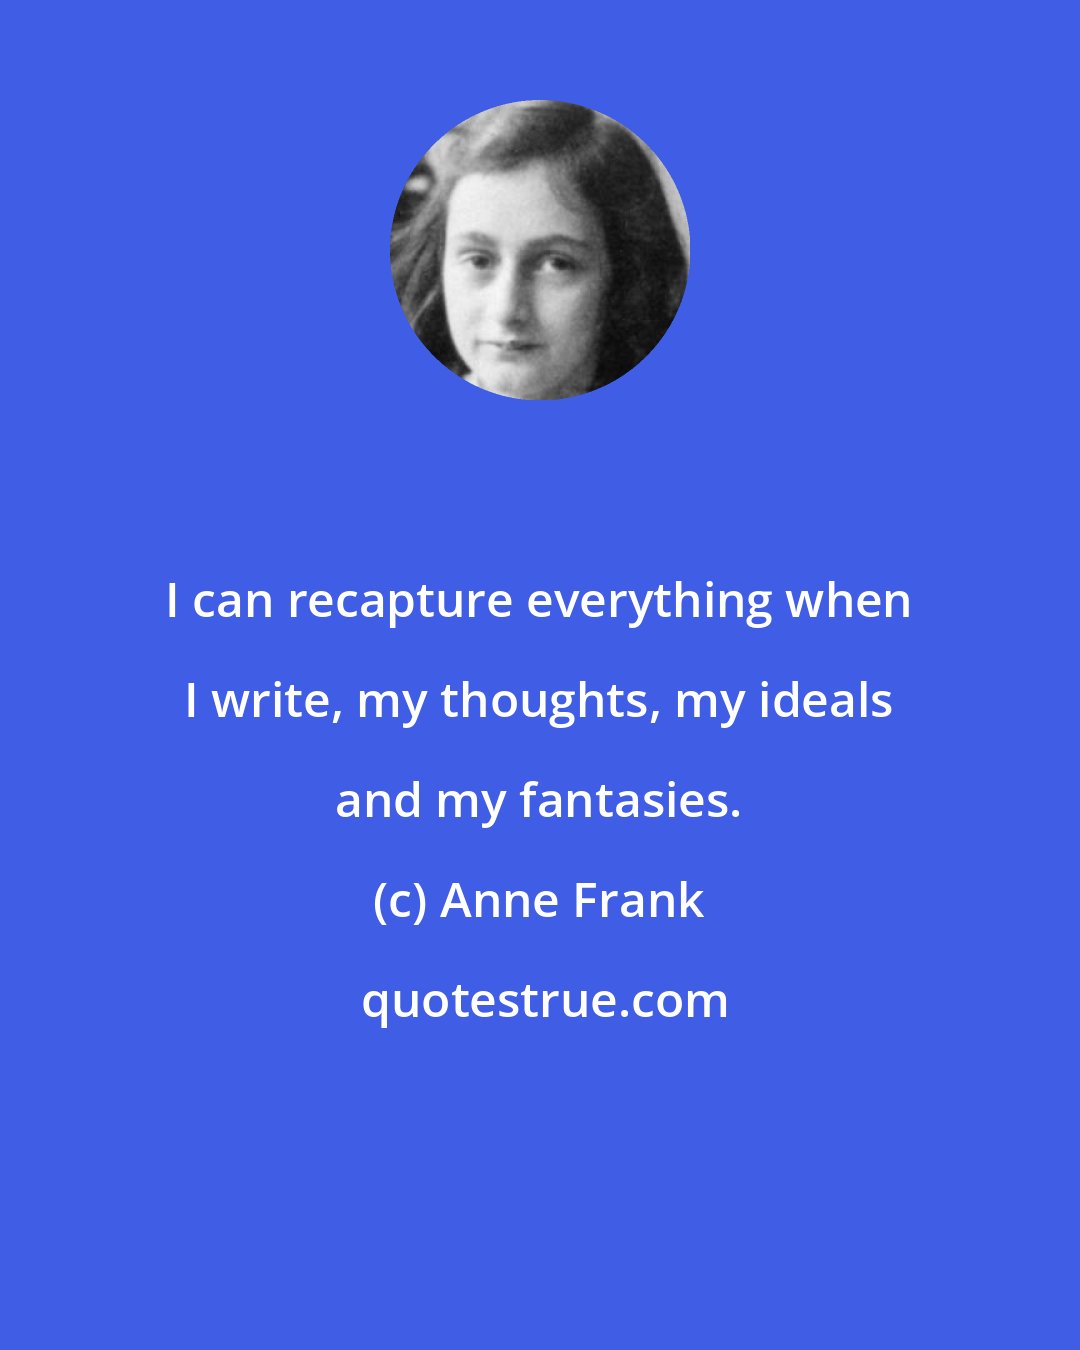 Anne Frank: I can recapture everything when I write, my thoughts, my ideals and my fantasies.